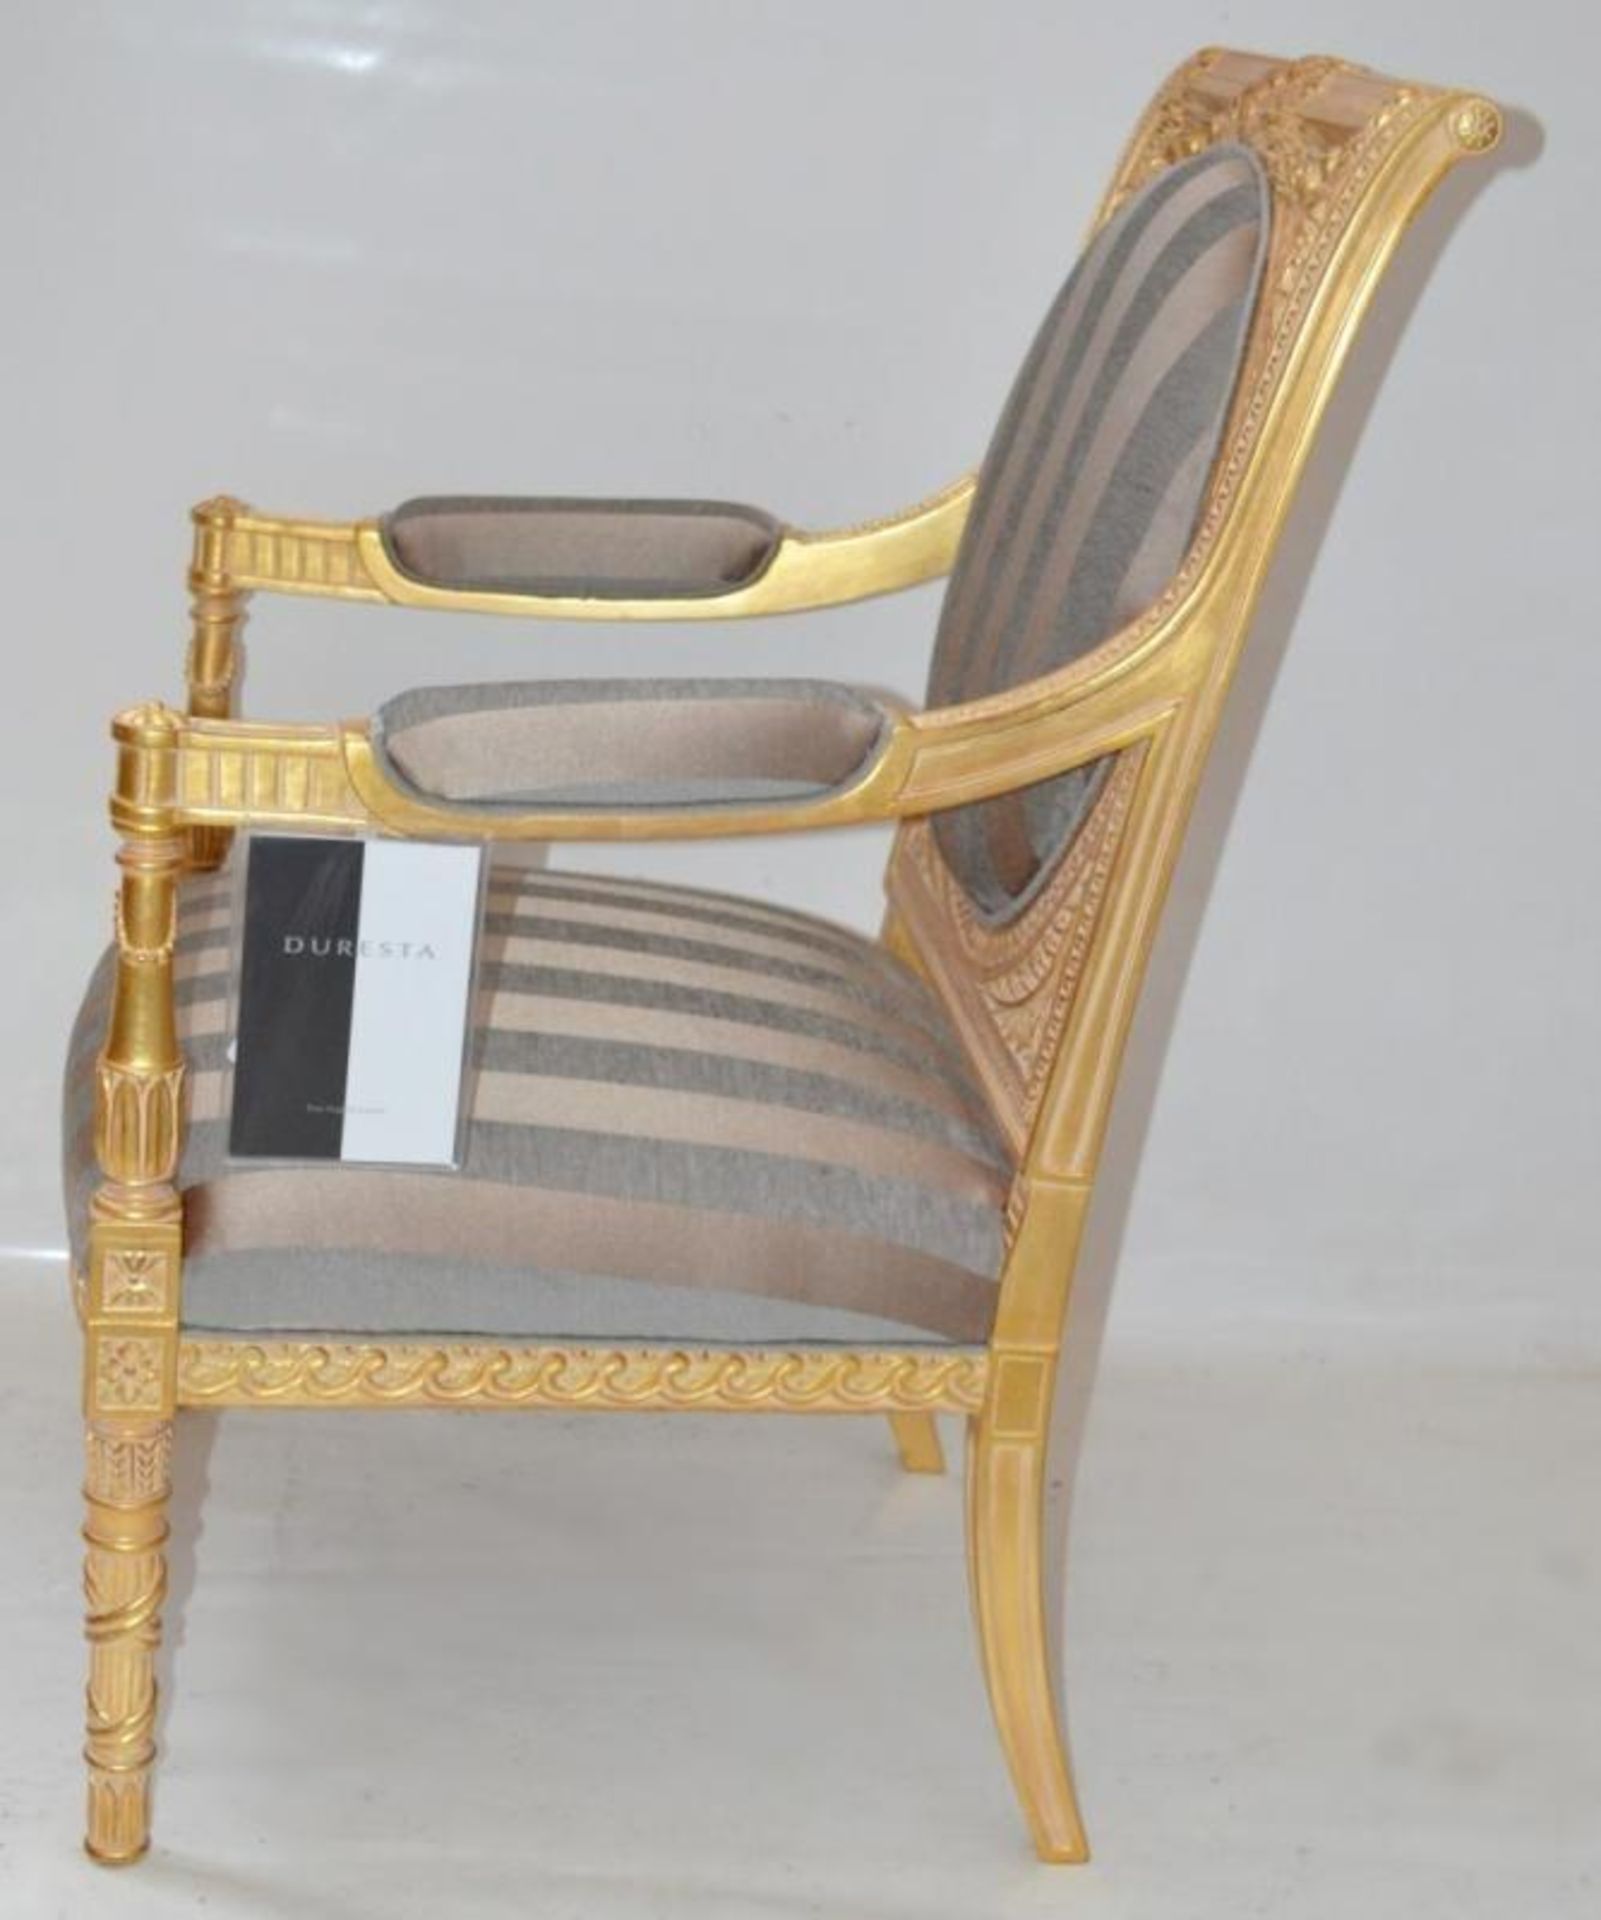 1 x DURESTA Flavia Chair - Features A Hand-Carved Hard Wood Frame With Hand-Stitched Coil Sprung Sea - Image 8 of 16